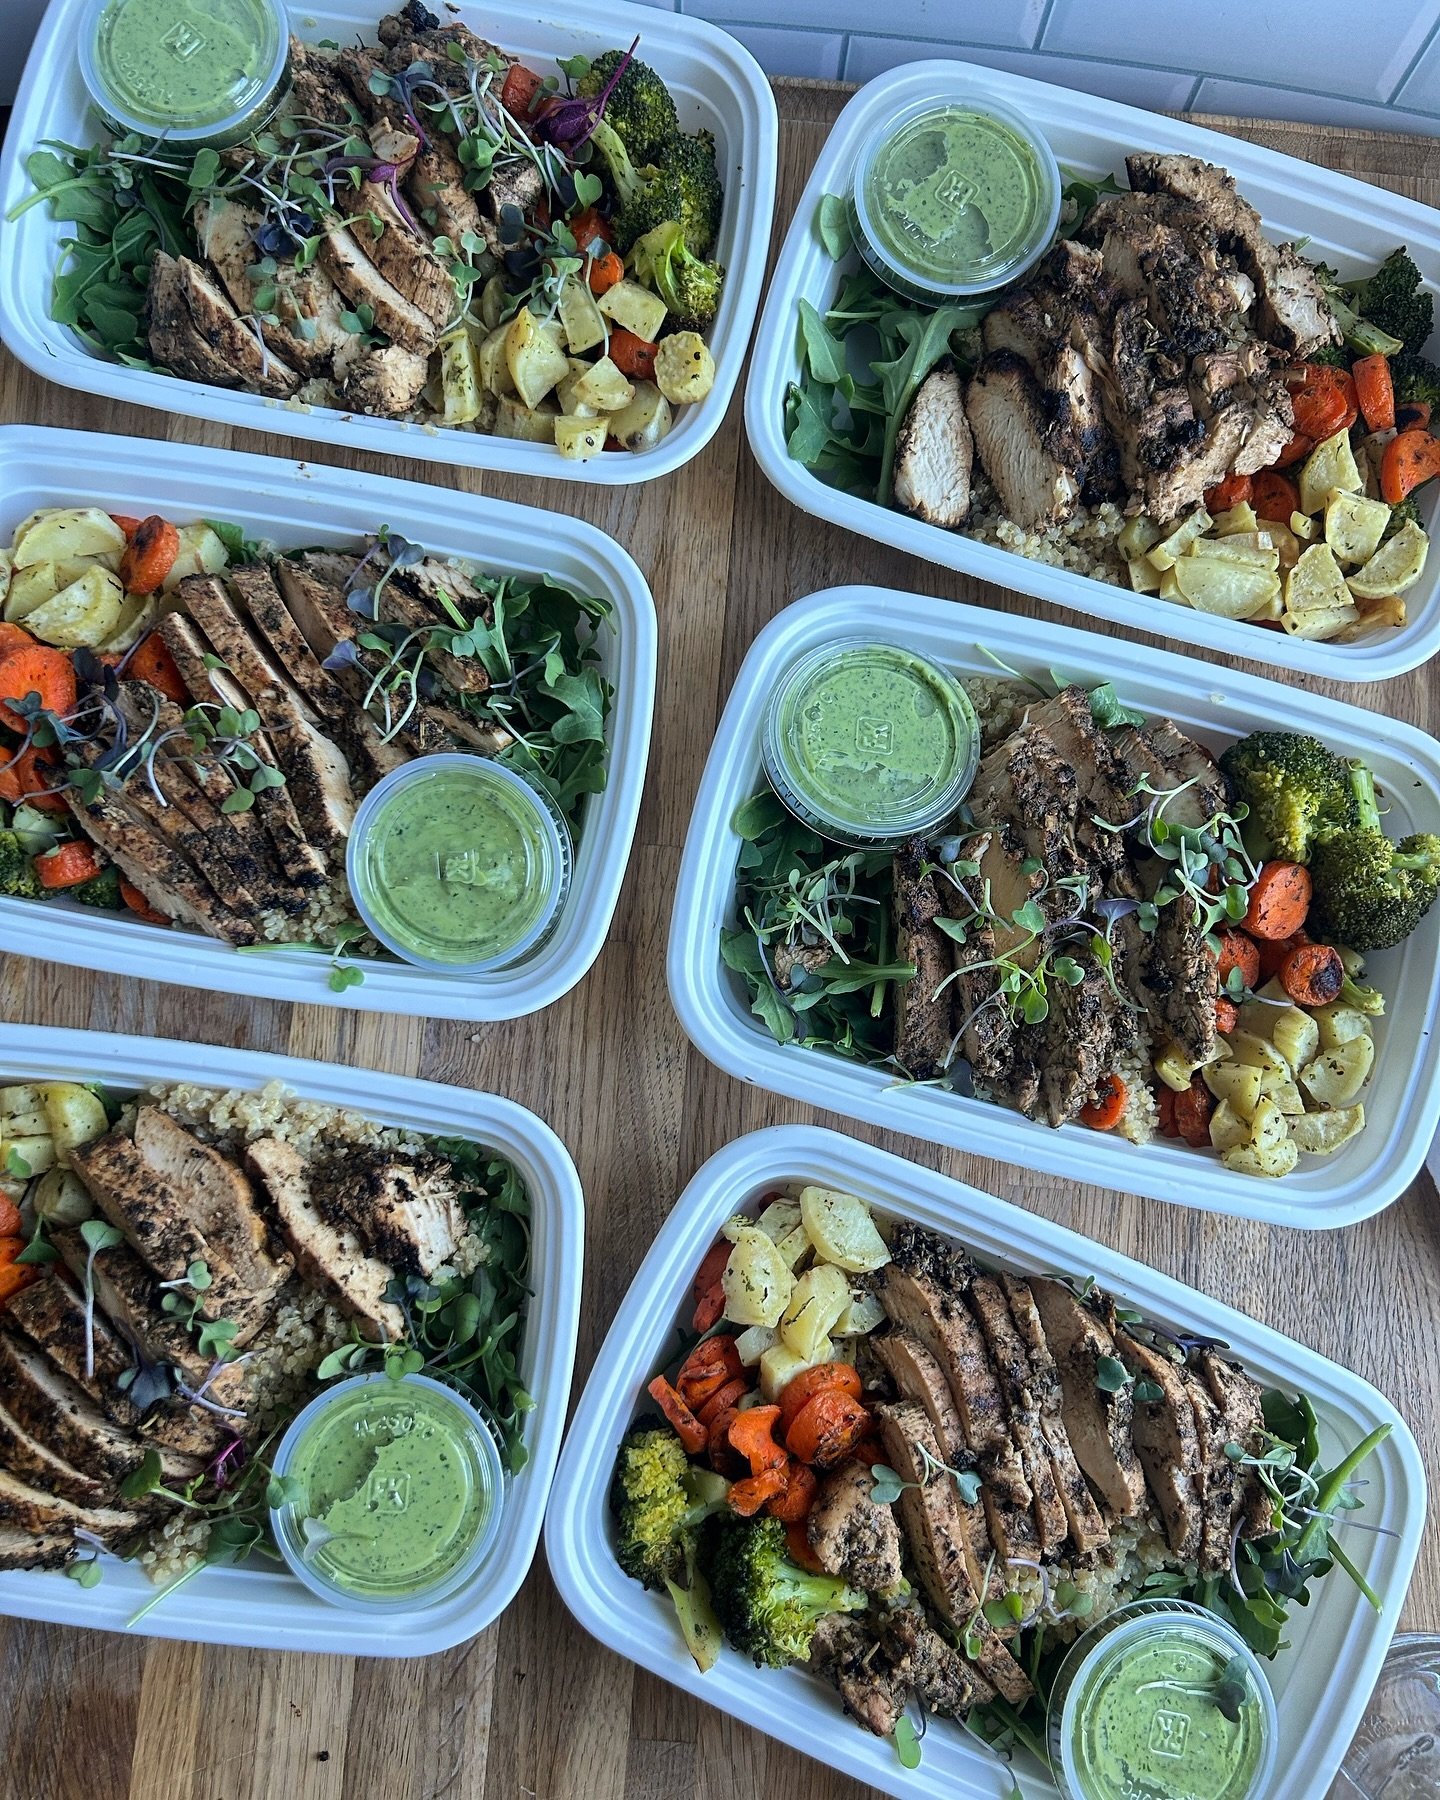 Nourish your body with these nutrient dense bowls 💫

Why Pappert&rsquo;s Products Meal Prep 🌱 is for you if you prioritize your health: 

🌱all items presented are curated by a Certified Nutritionist 

🌱 we only use avocado oil &amp; extra virgin 